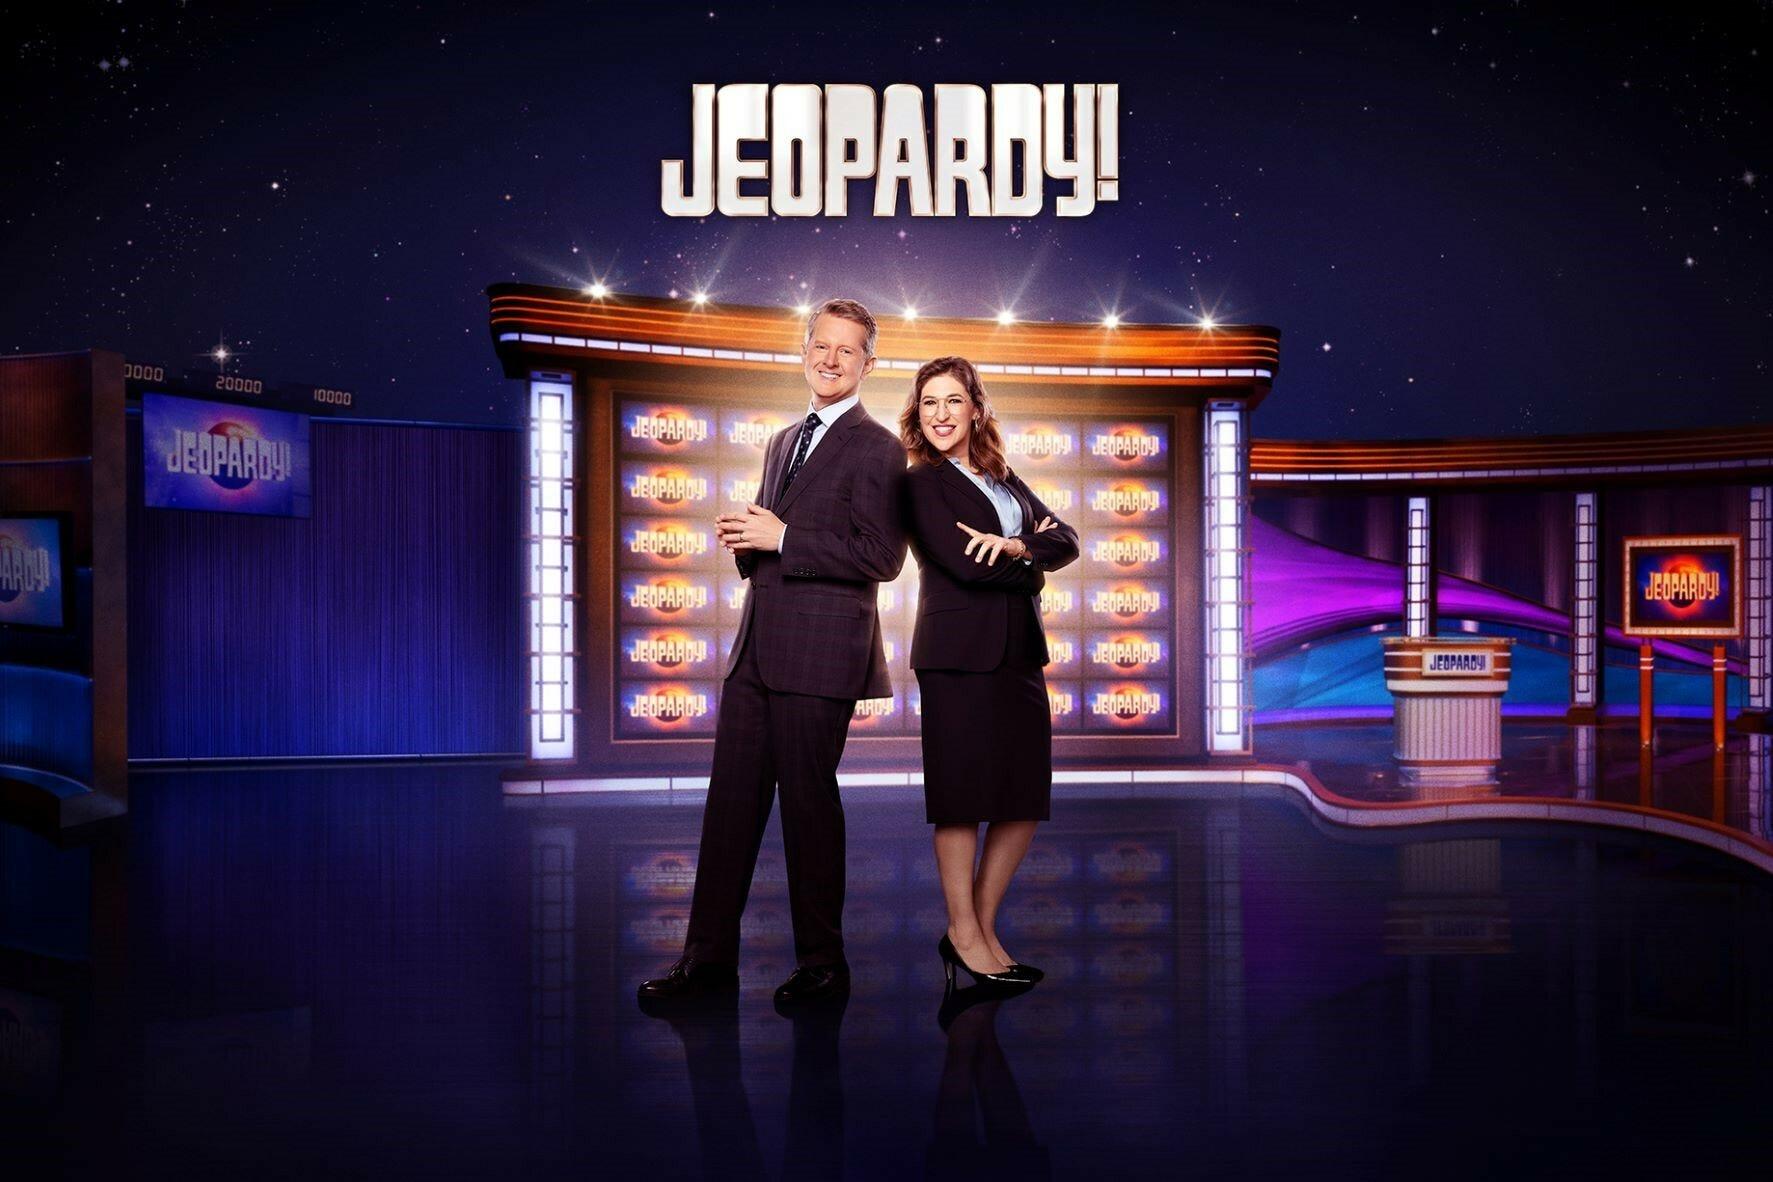 Ken Jennings and Mayim Bialik previously split "Jeopardy!" hosting duties, as shown in this promotional image released in 2022.